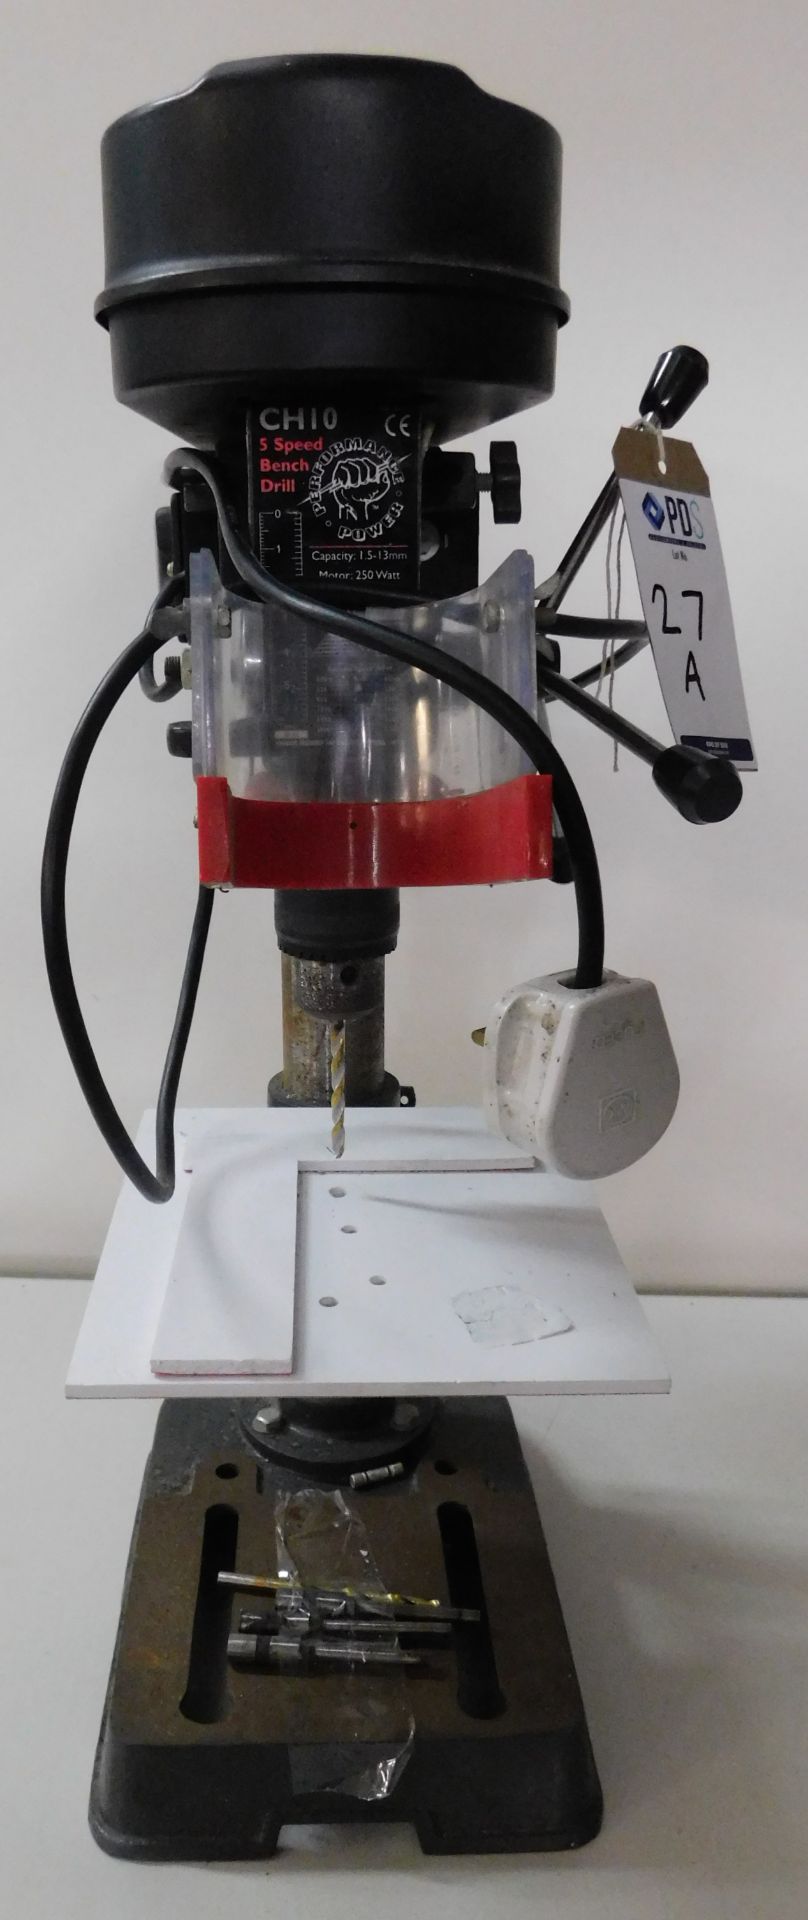 Performance 5-Speed Bench Top Drill, Serial Number 300747 (Location: Tonbridge, Kent. Please Refer